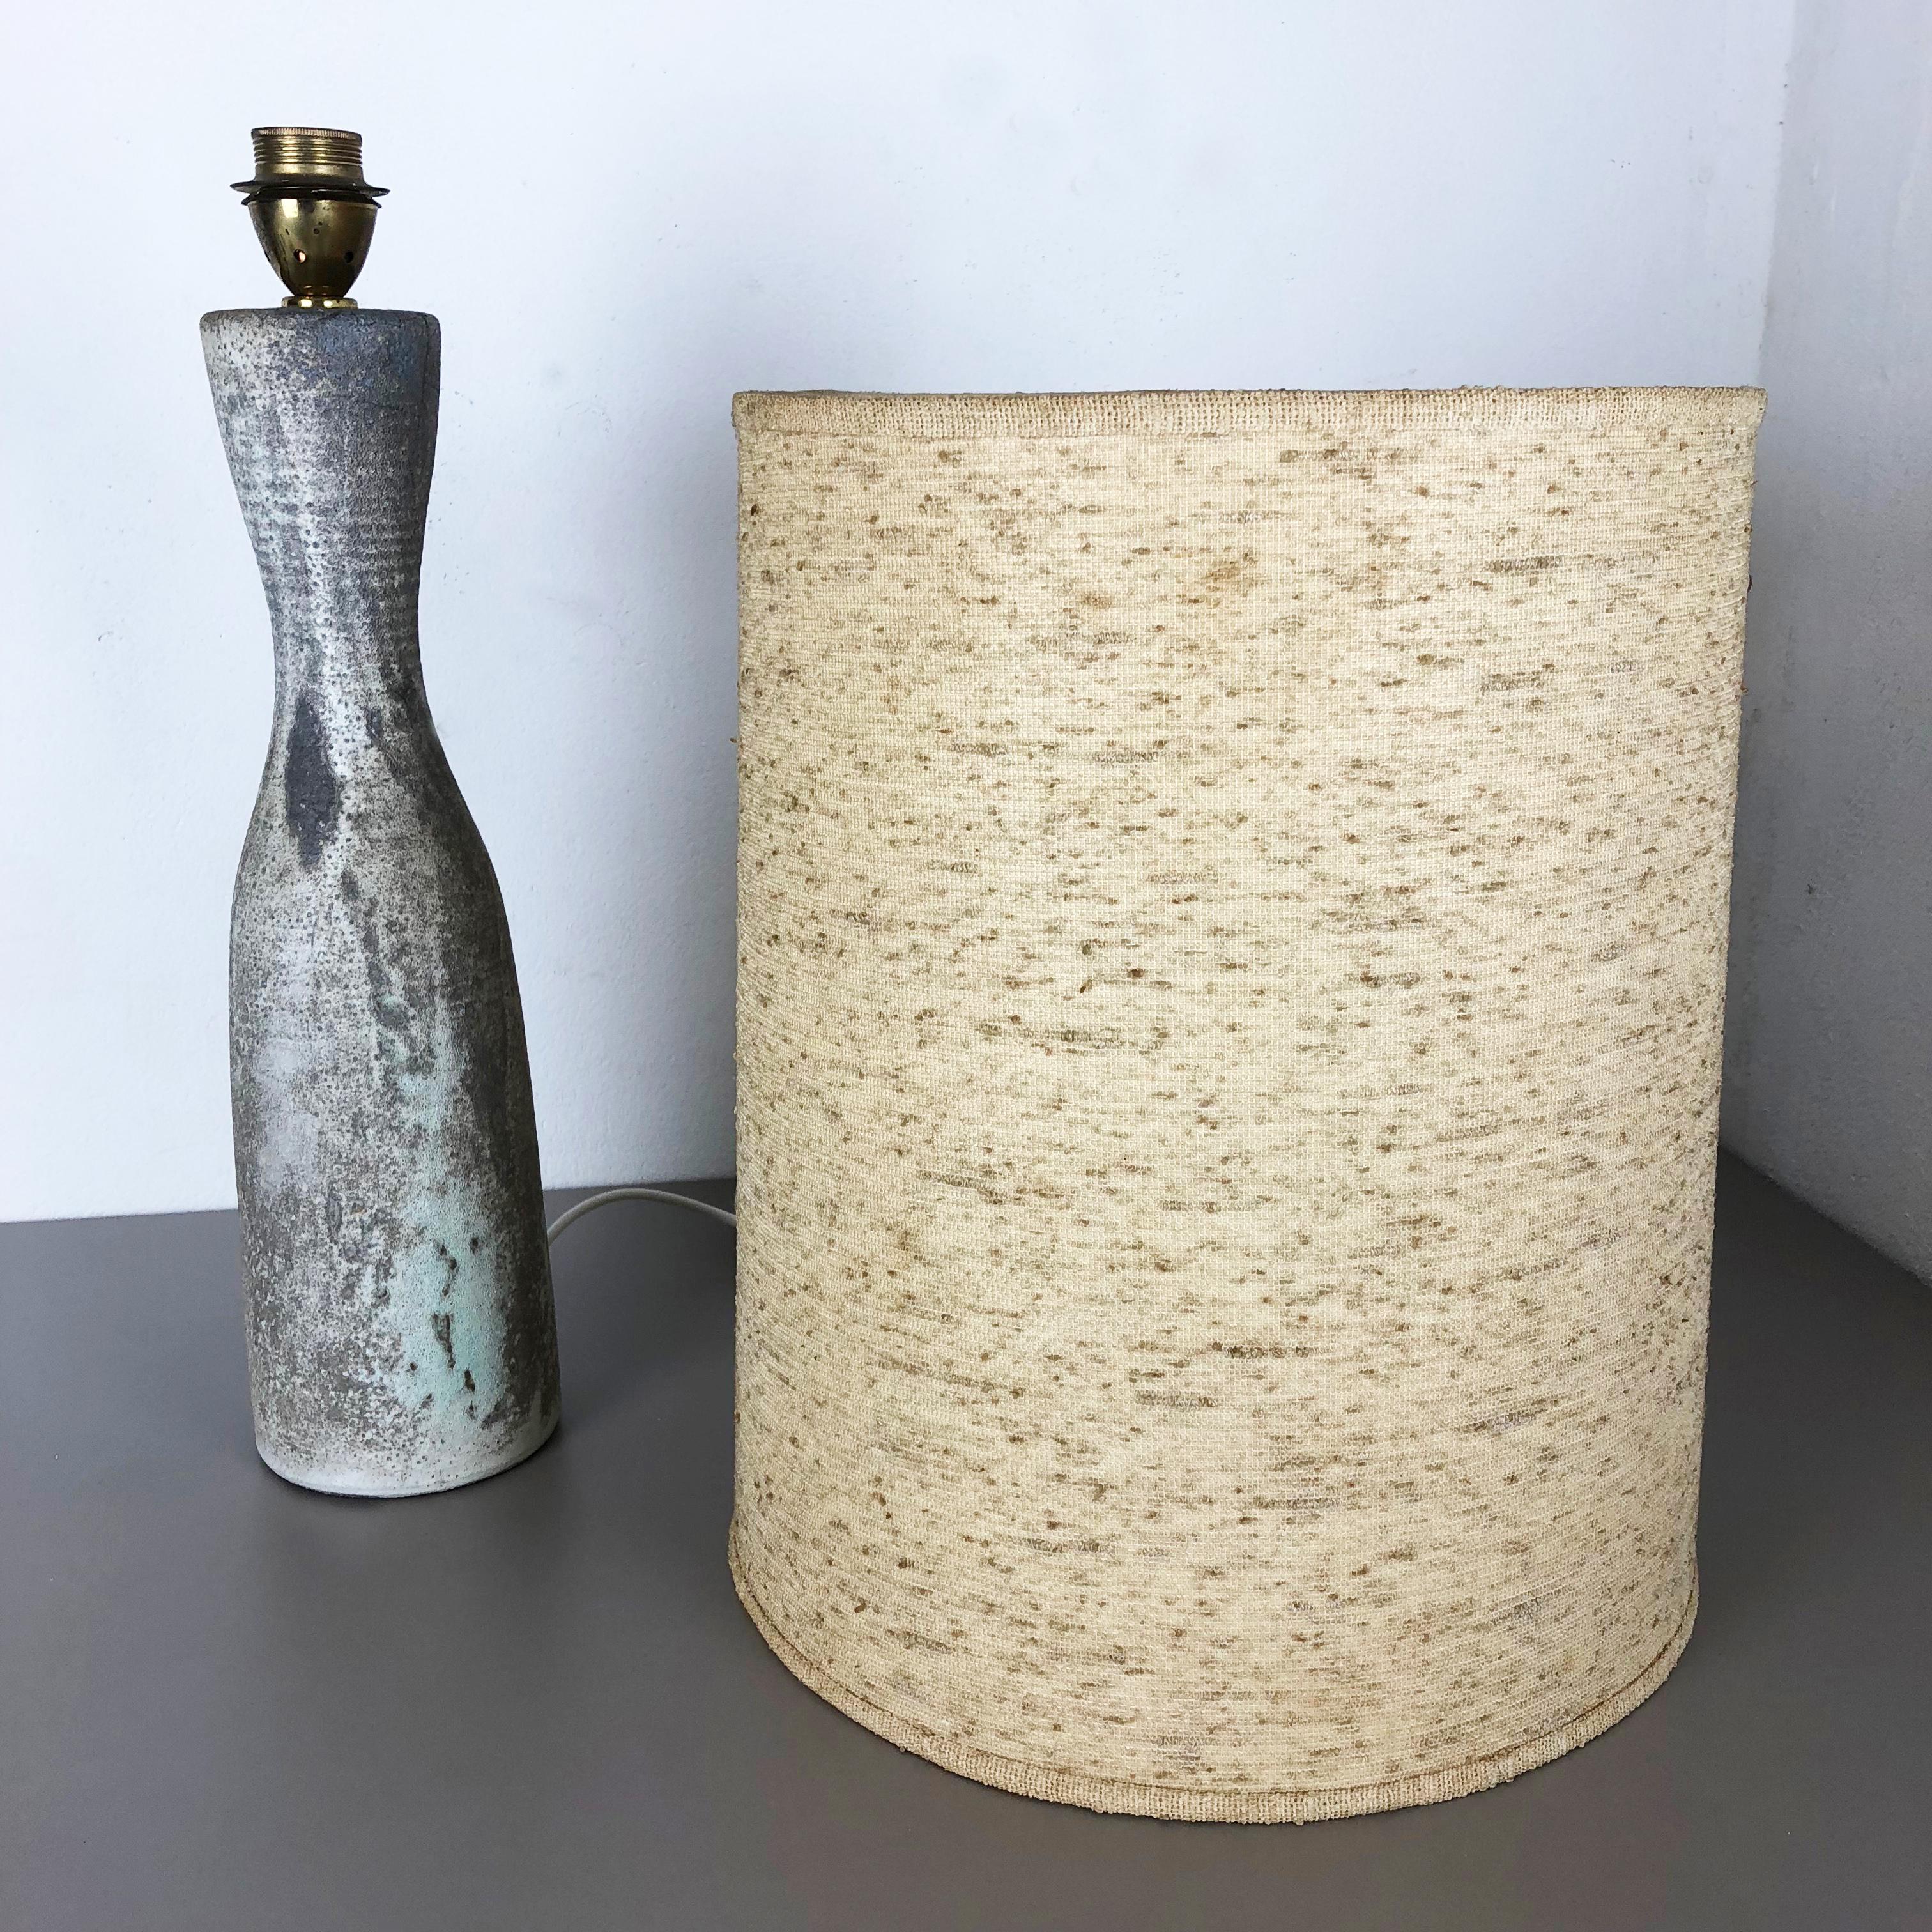 Ceramic Studio Pottery Table Light by Piet Knepper for Mobach, Netherlands 1960s For Sale 7